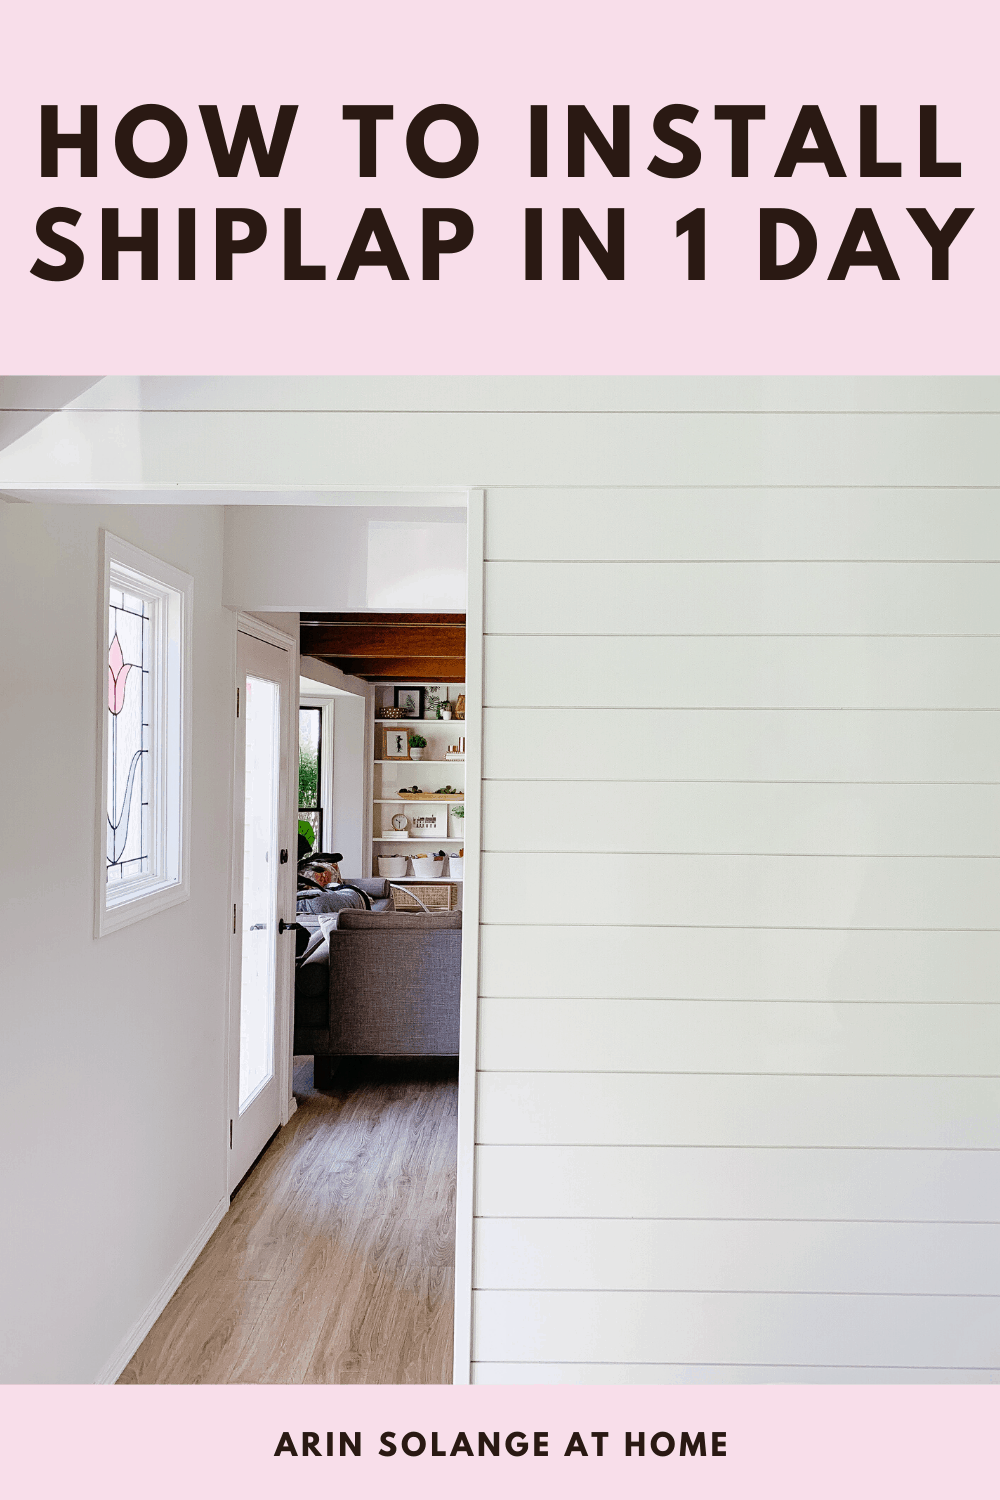 How to install shiplap in 1 day